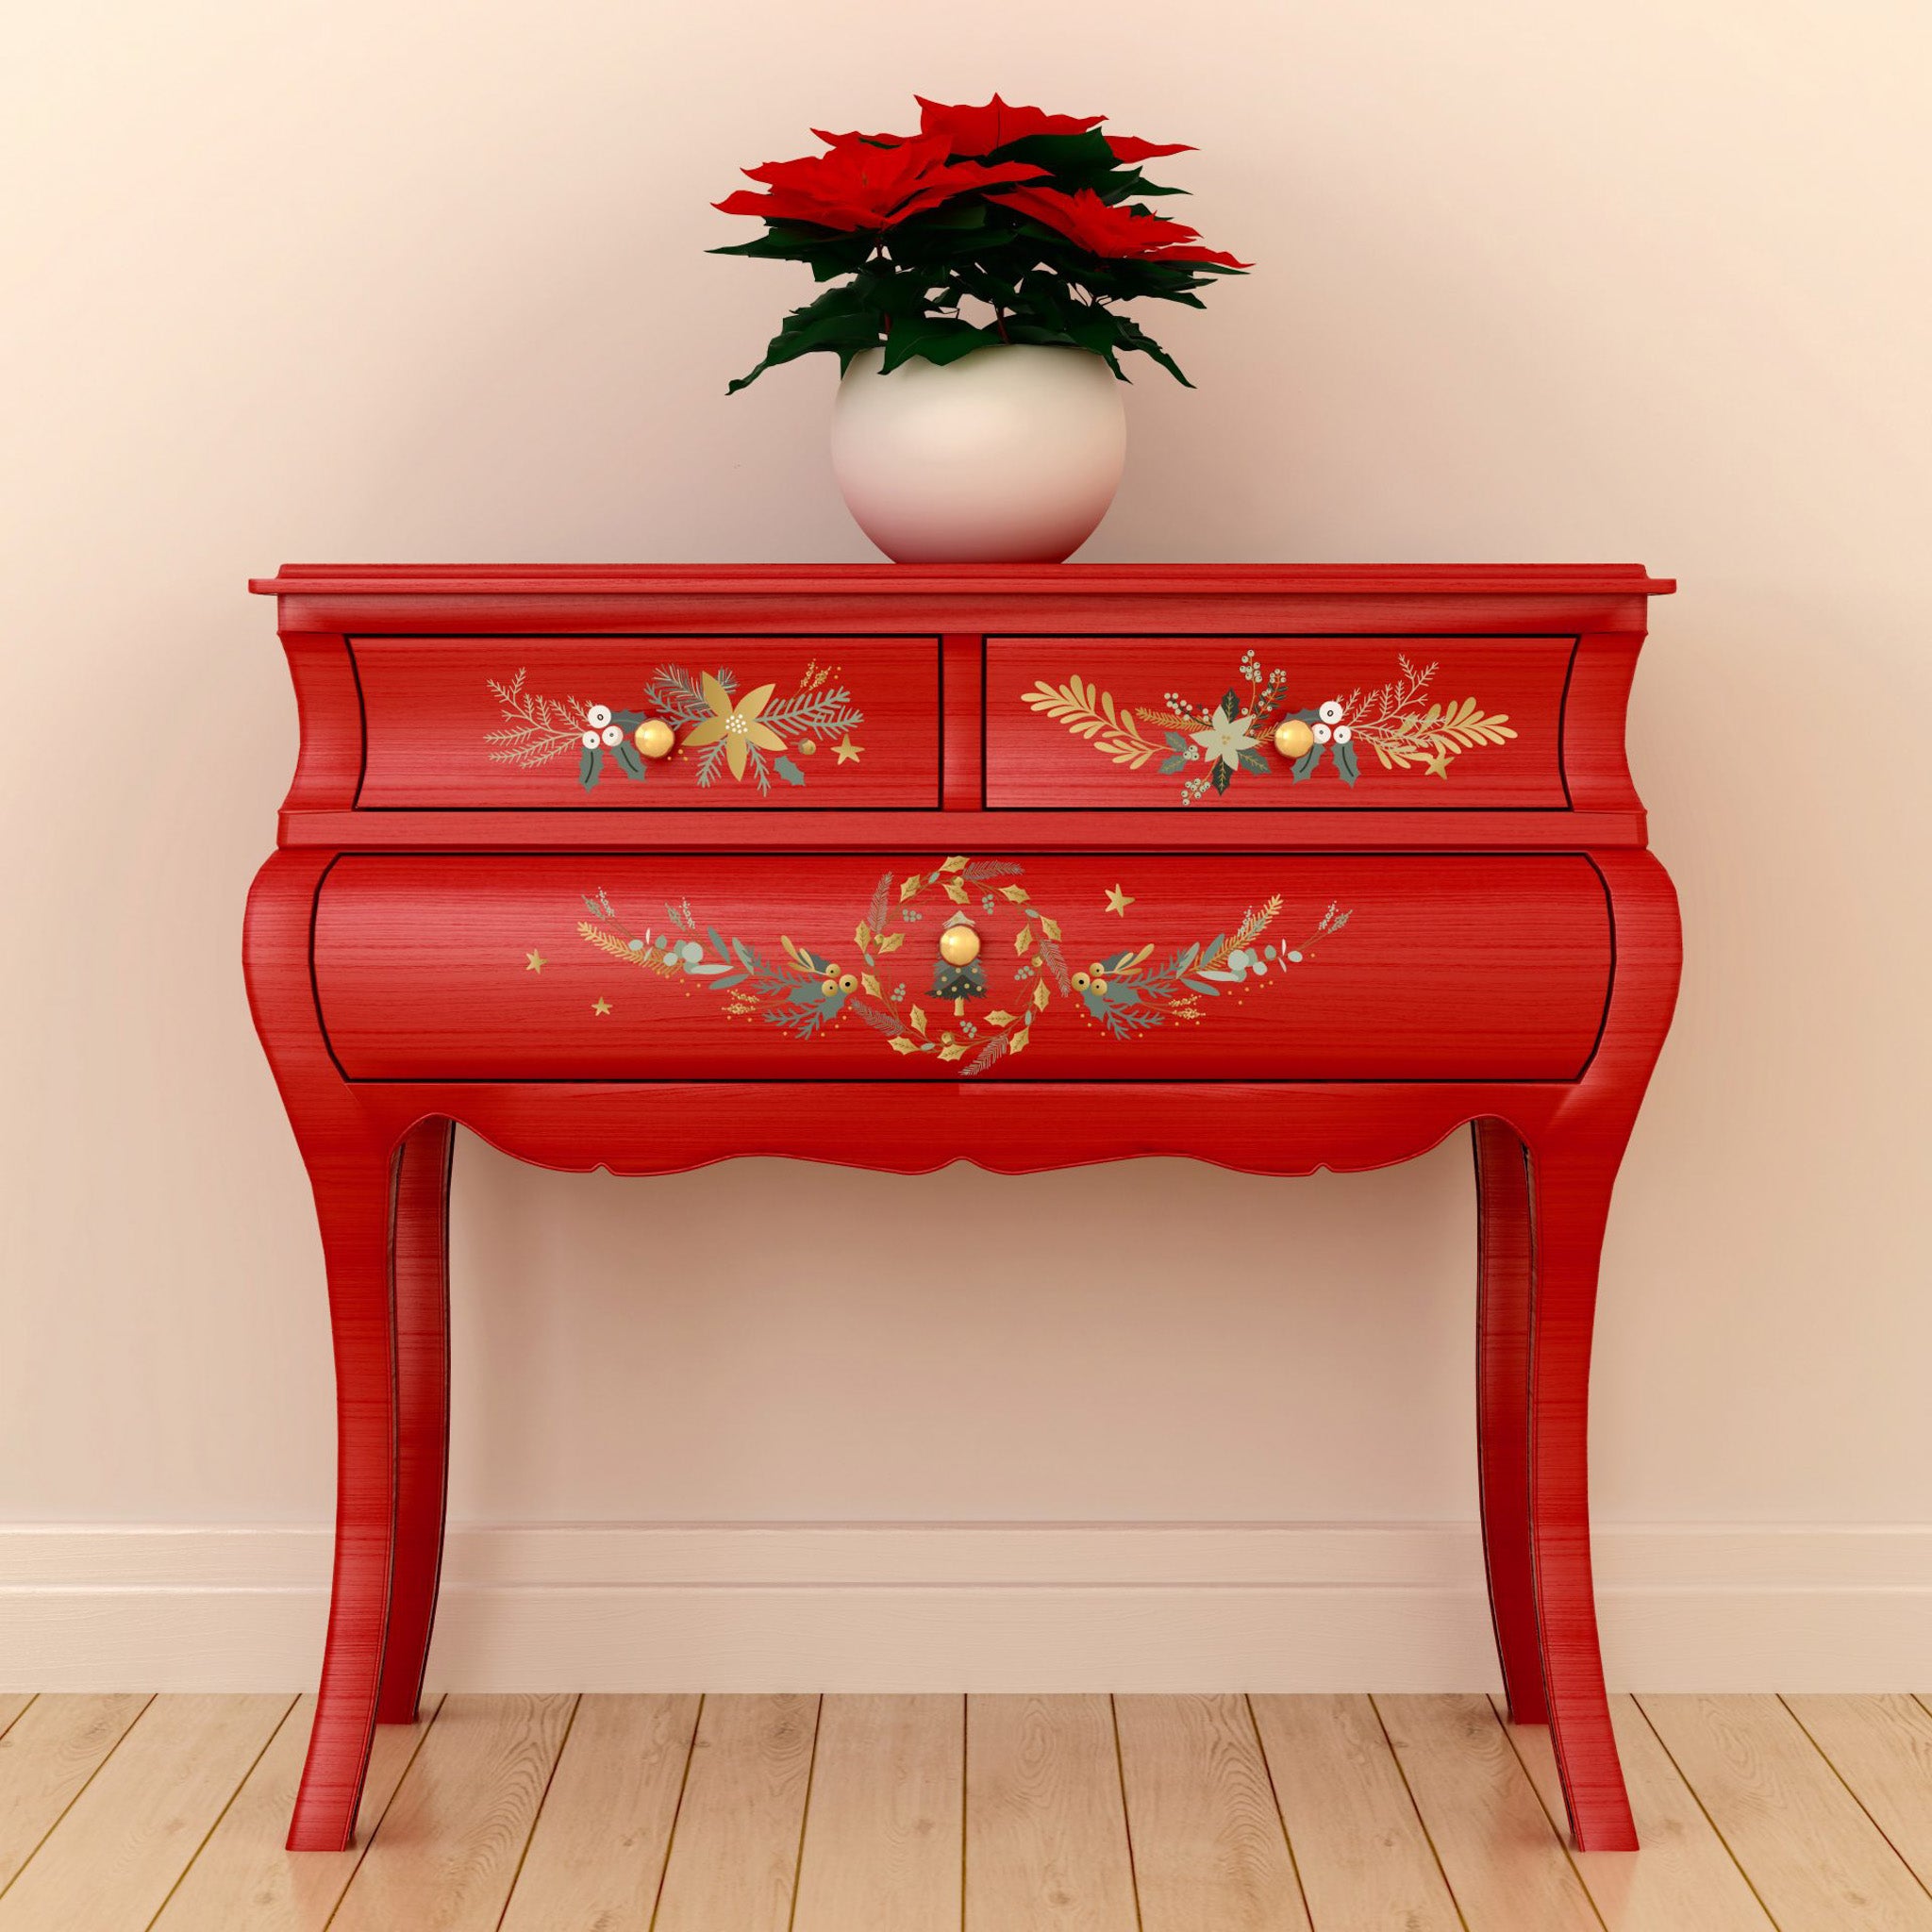 A vintage red side table features ReDesign with Prima's Holiday Spirit small transfer on its 3 small drawers.